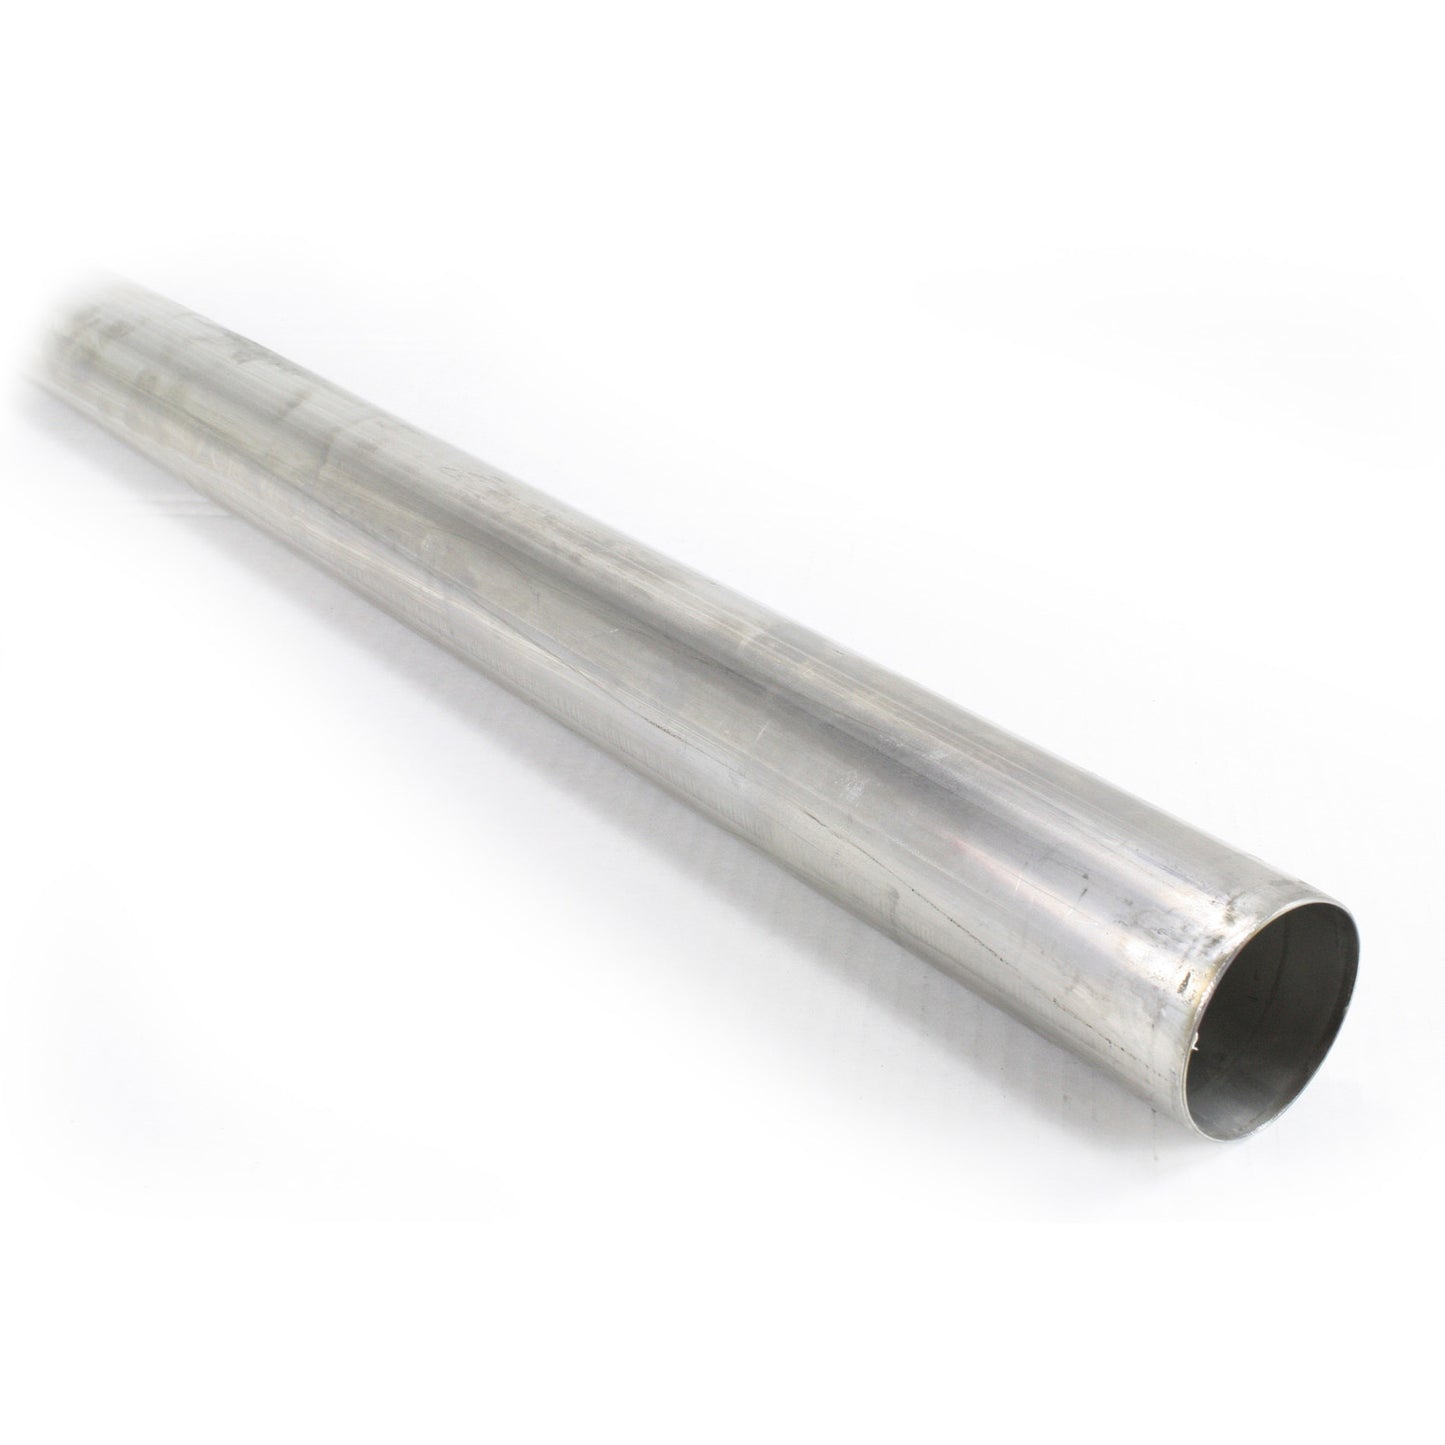 Patriot Exhaust H7710 Tubing 304 Stainless Steel 2 1/4"